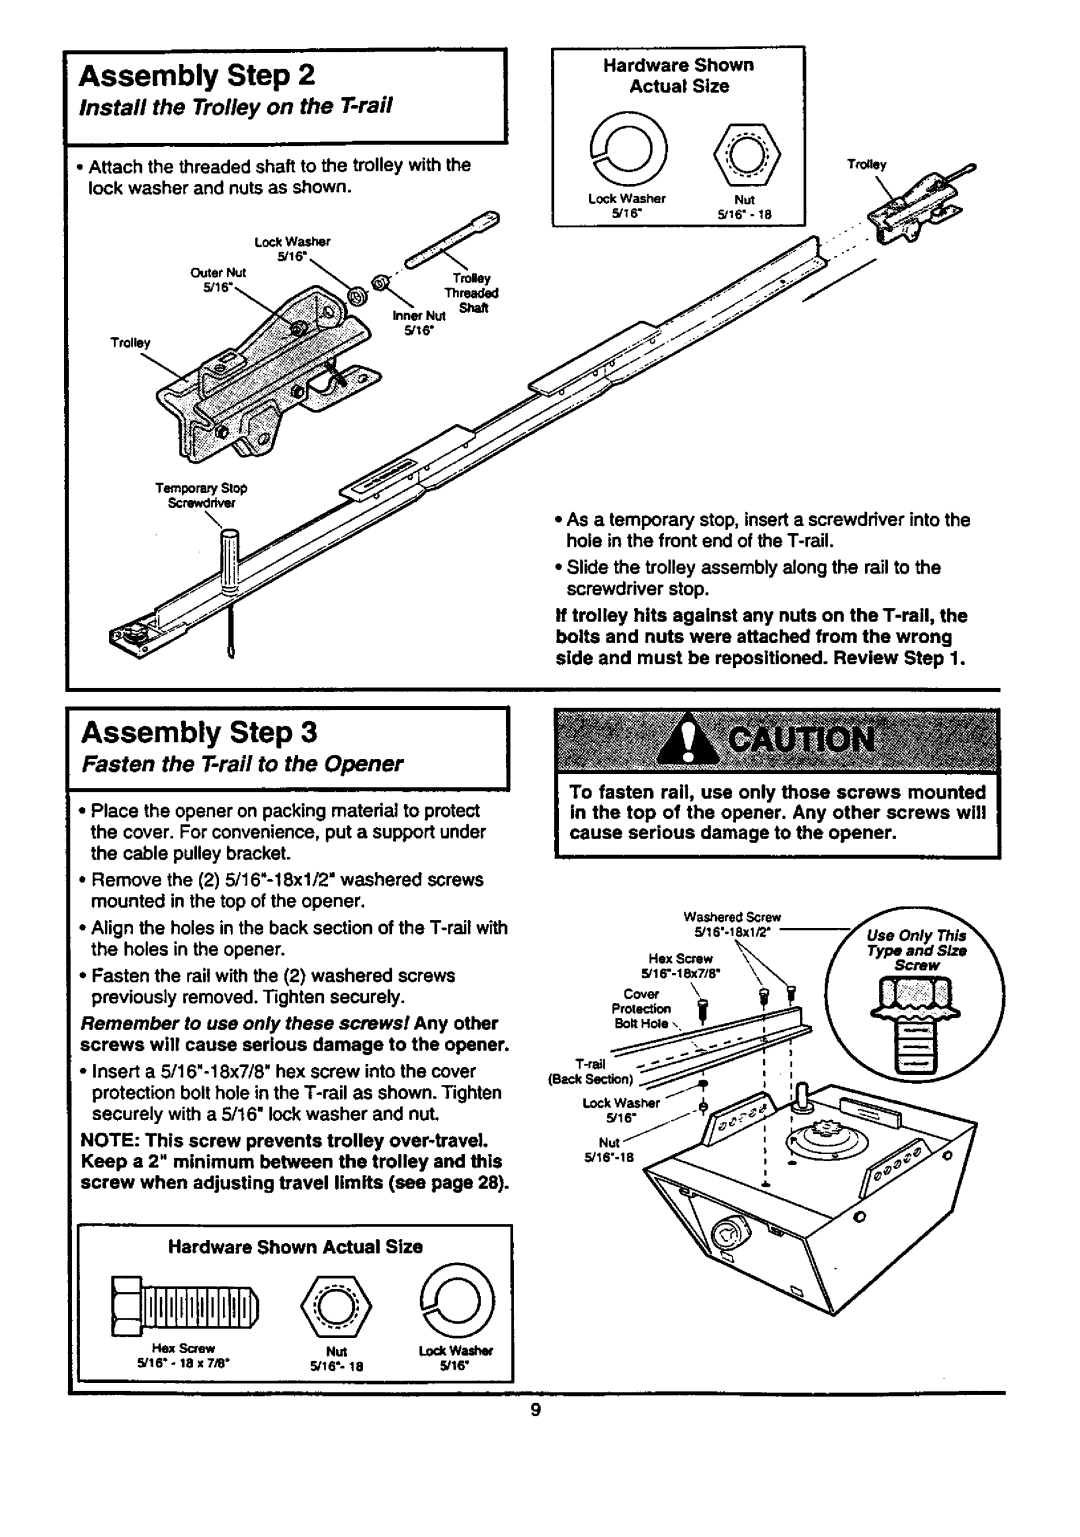 Craftsman 139.53677SRT1, 139.53671SRT1 Assembly Step, Install the Trolley on the T-rail, Fasten the T-rail to the Opener 